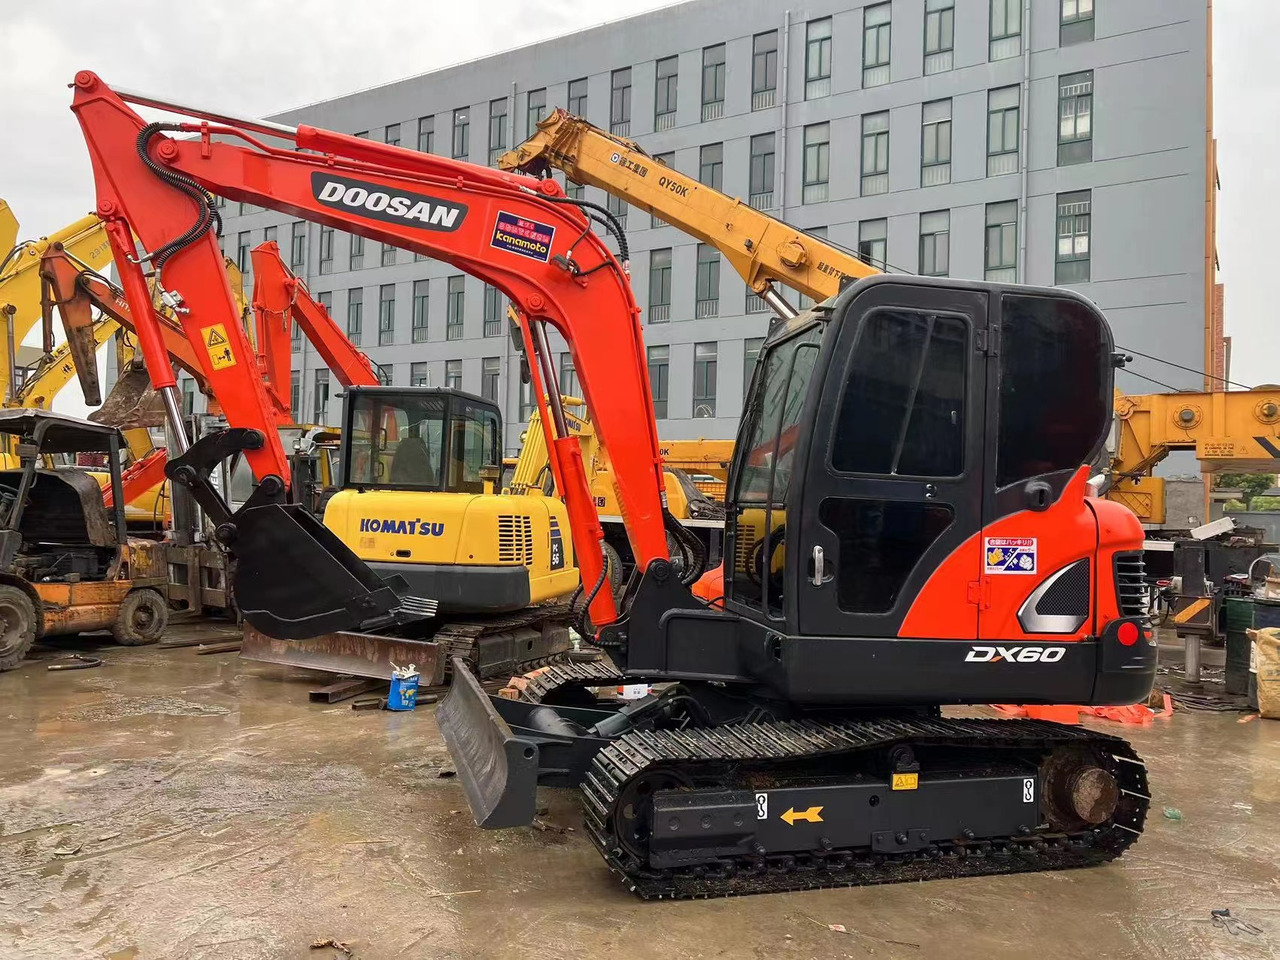 Rupsgraafmachine High quality DOOSAN used excavator DX60 strong power hot selling !!!: afbeelding 5